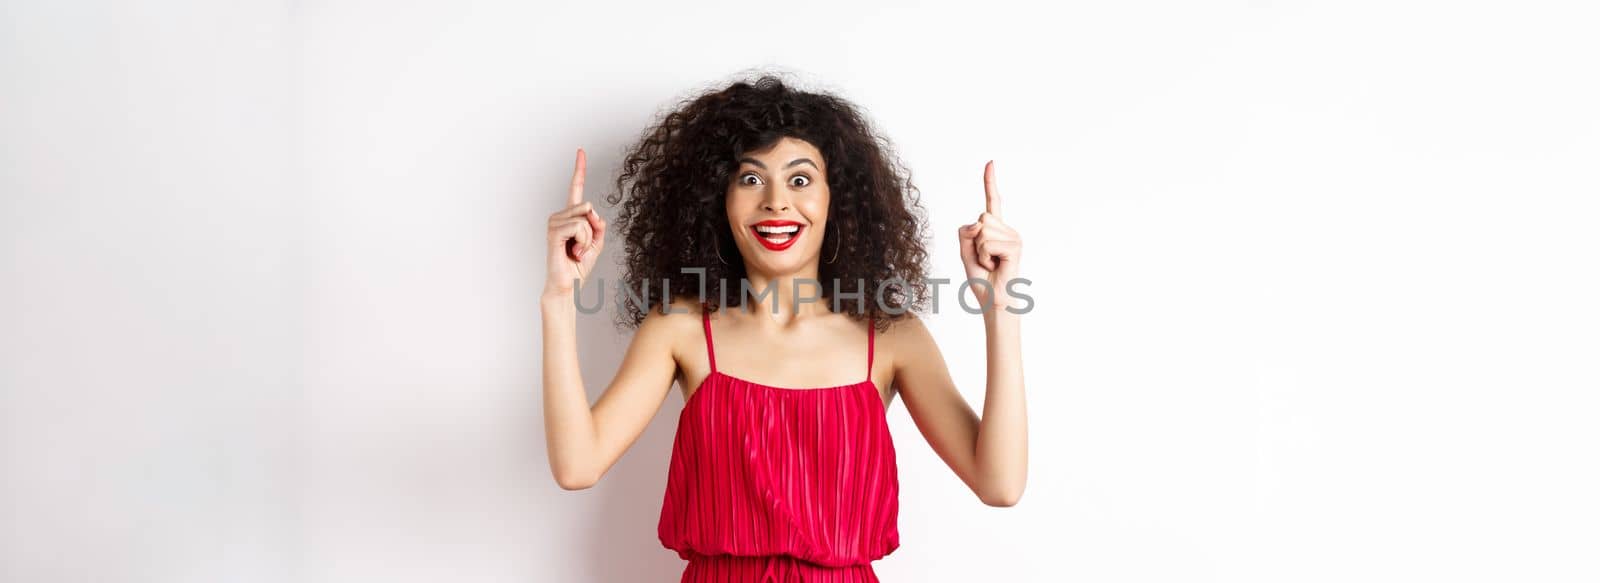 Happy elegant woman in red dress and makeup, smiling amused and pointing fingers up at logo, showing advertisement, standing over white background.